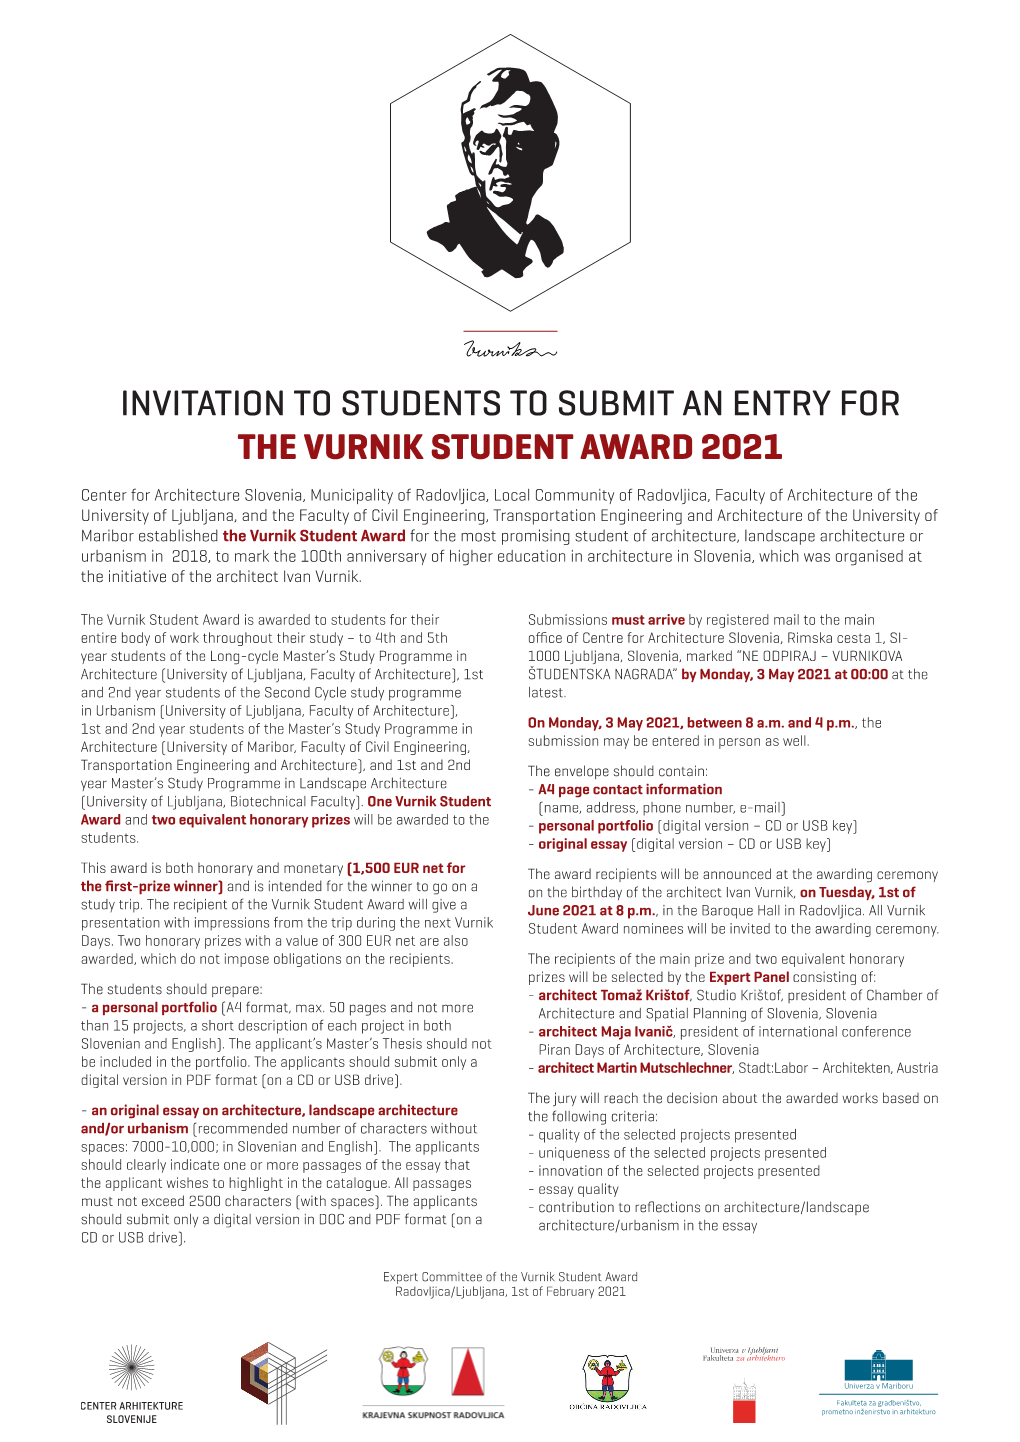 Invitation to Students to Submit an Entry for the Vurnik Student Award 2021